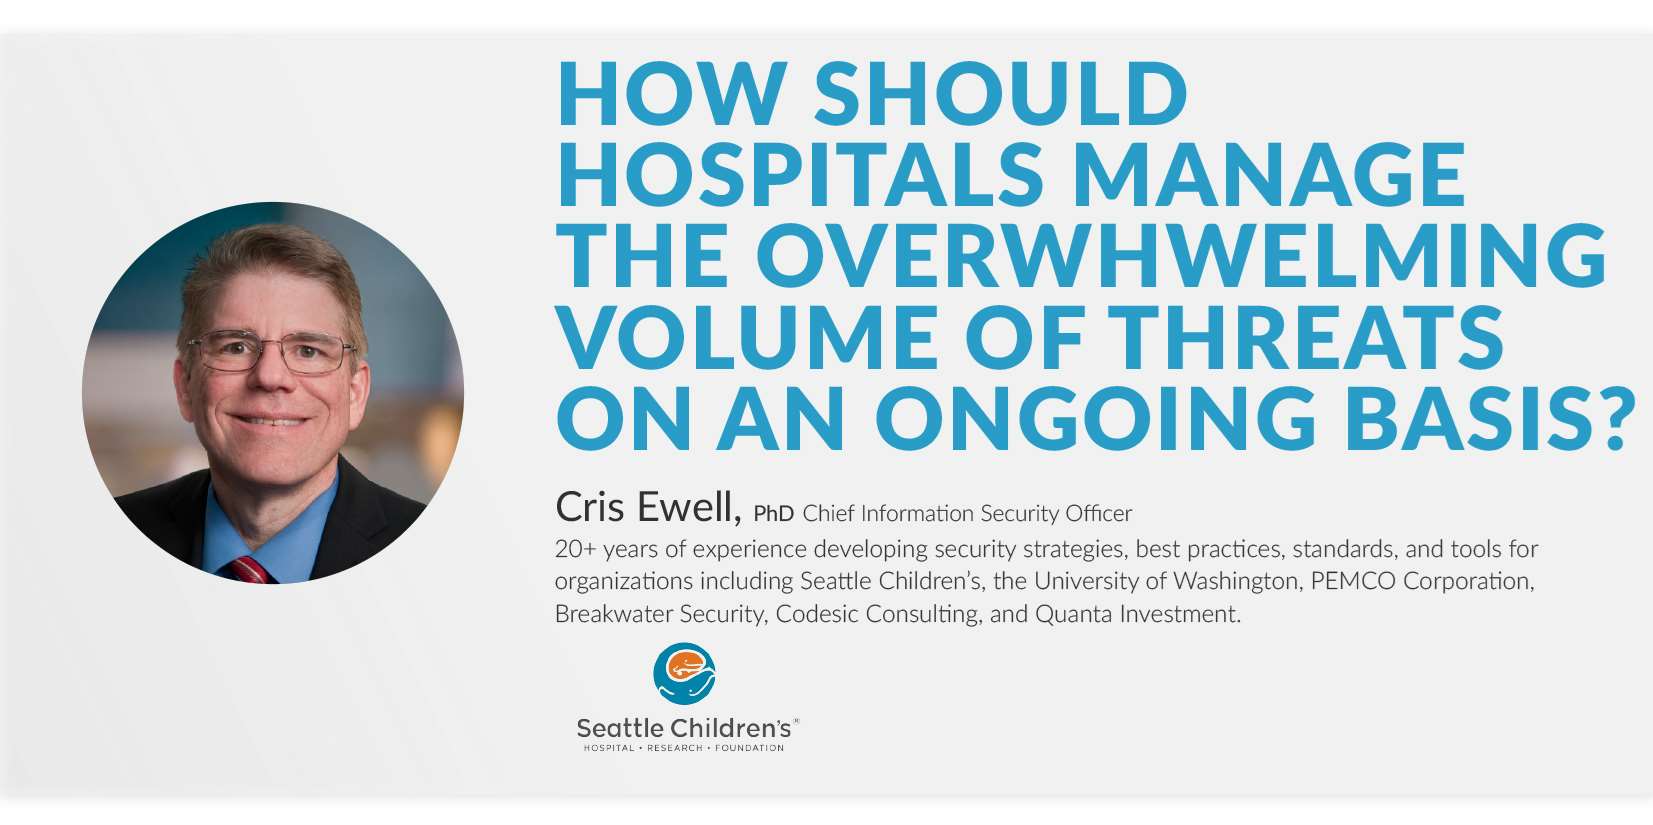 how should hospitals manage the overwelming volume of threats on an ongoing basis